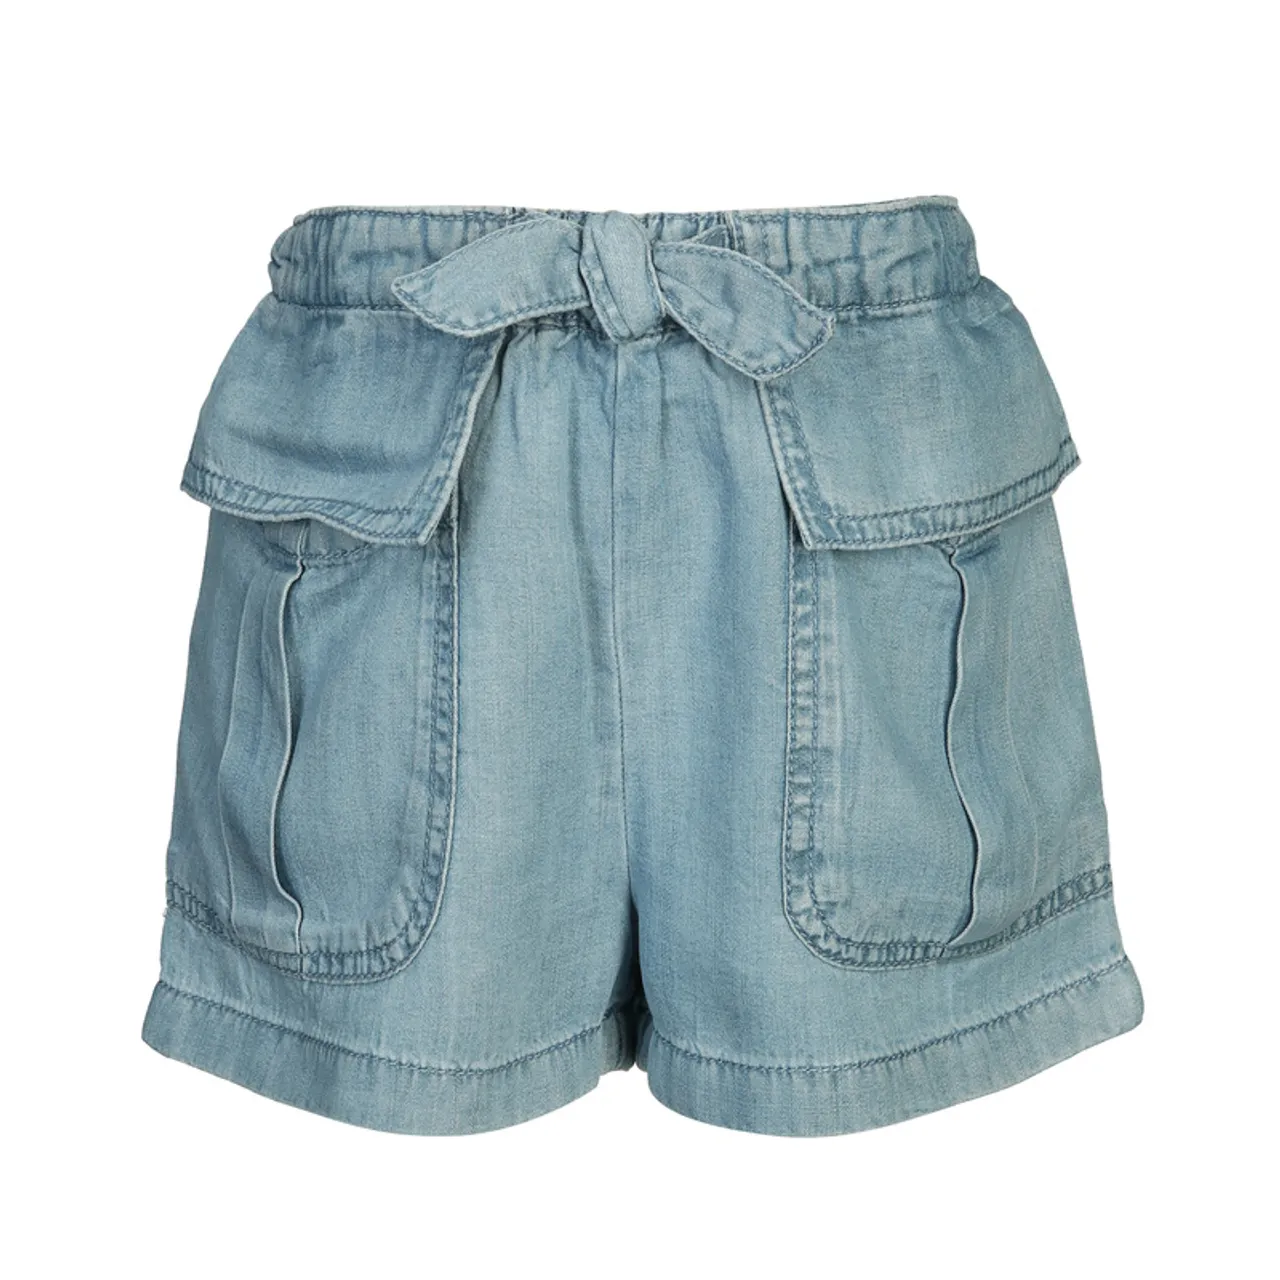 Shorts POCKETS in jeansblau